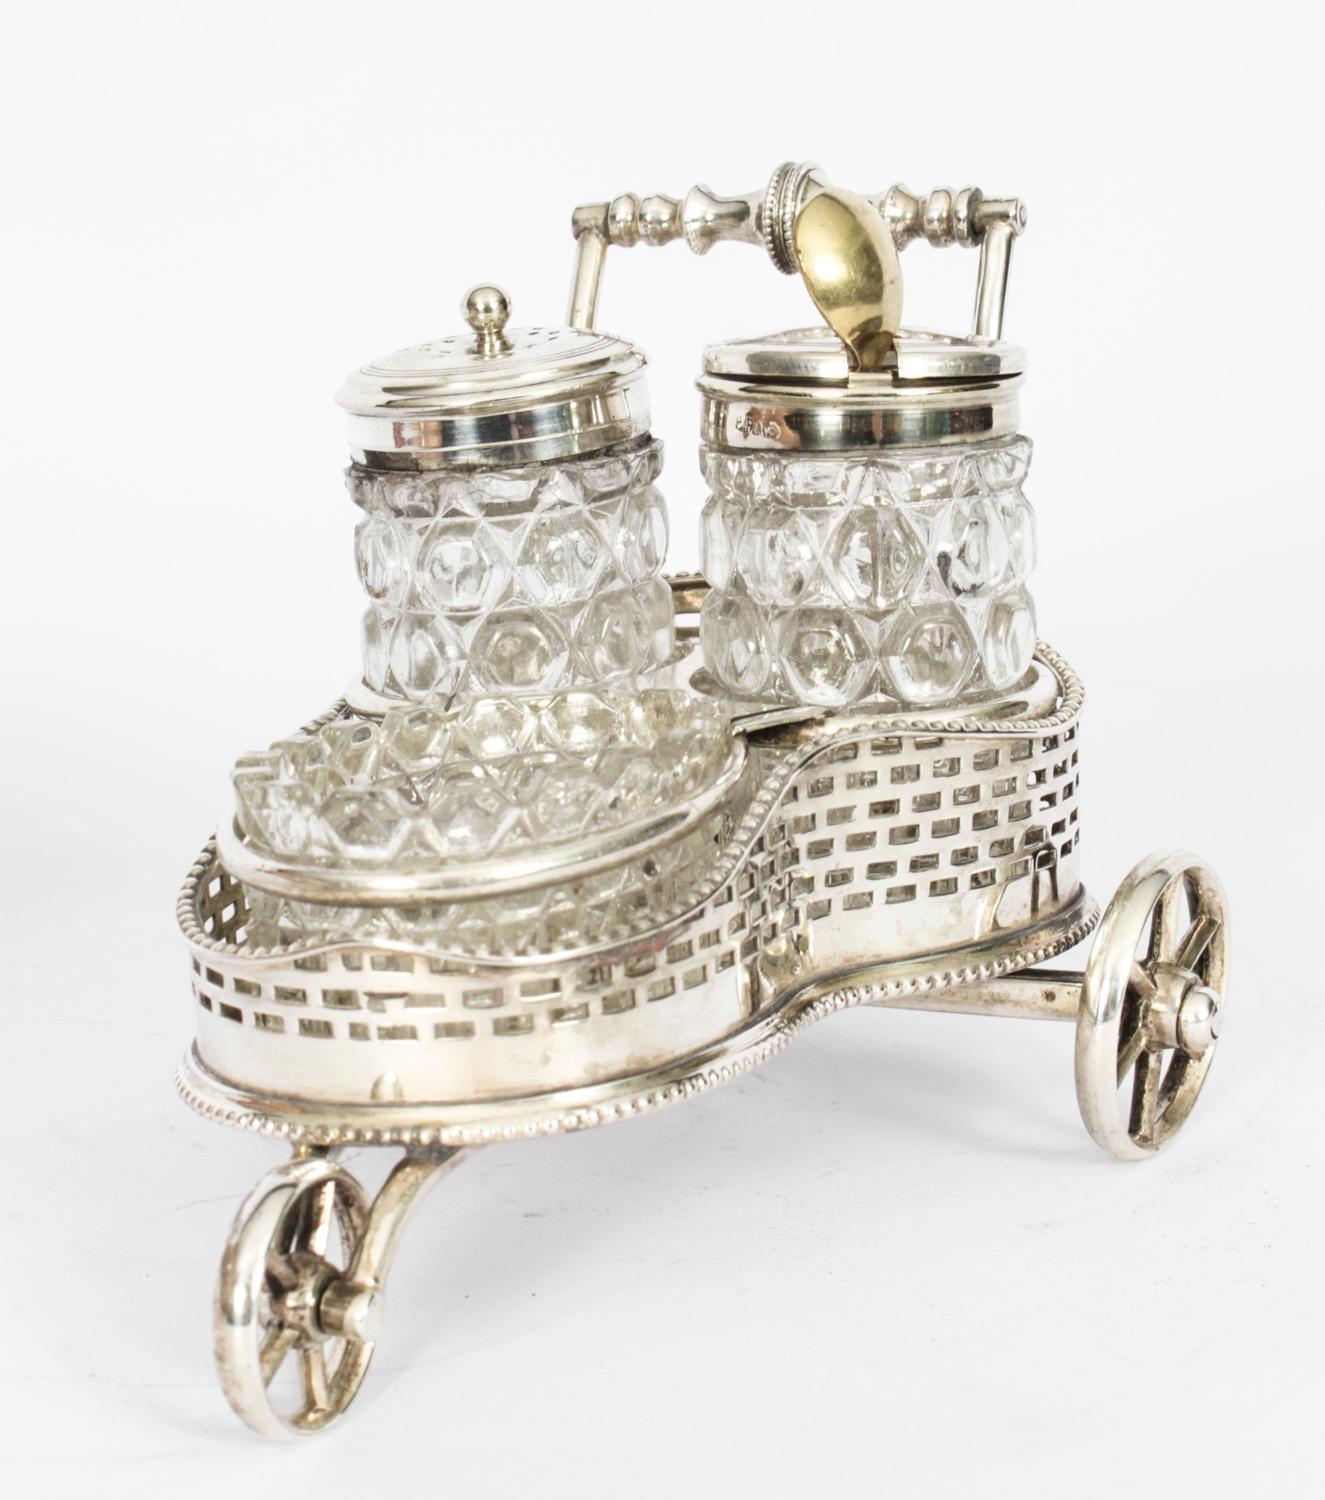 This is a gorgeous antique Victorian silver plated cruet set circa 1885 in date.
 
The set comprises a beautifully decorative silver plated cruet stand with cut glass containers for salt, pepper and mustard,

The antique silver plated cruet